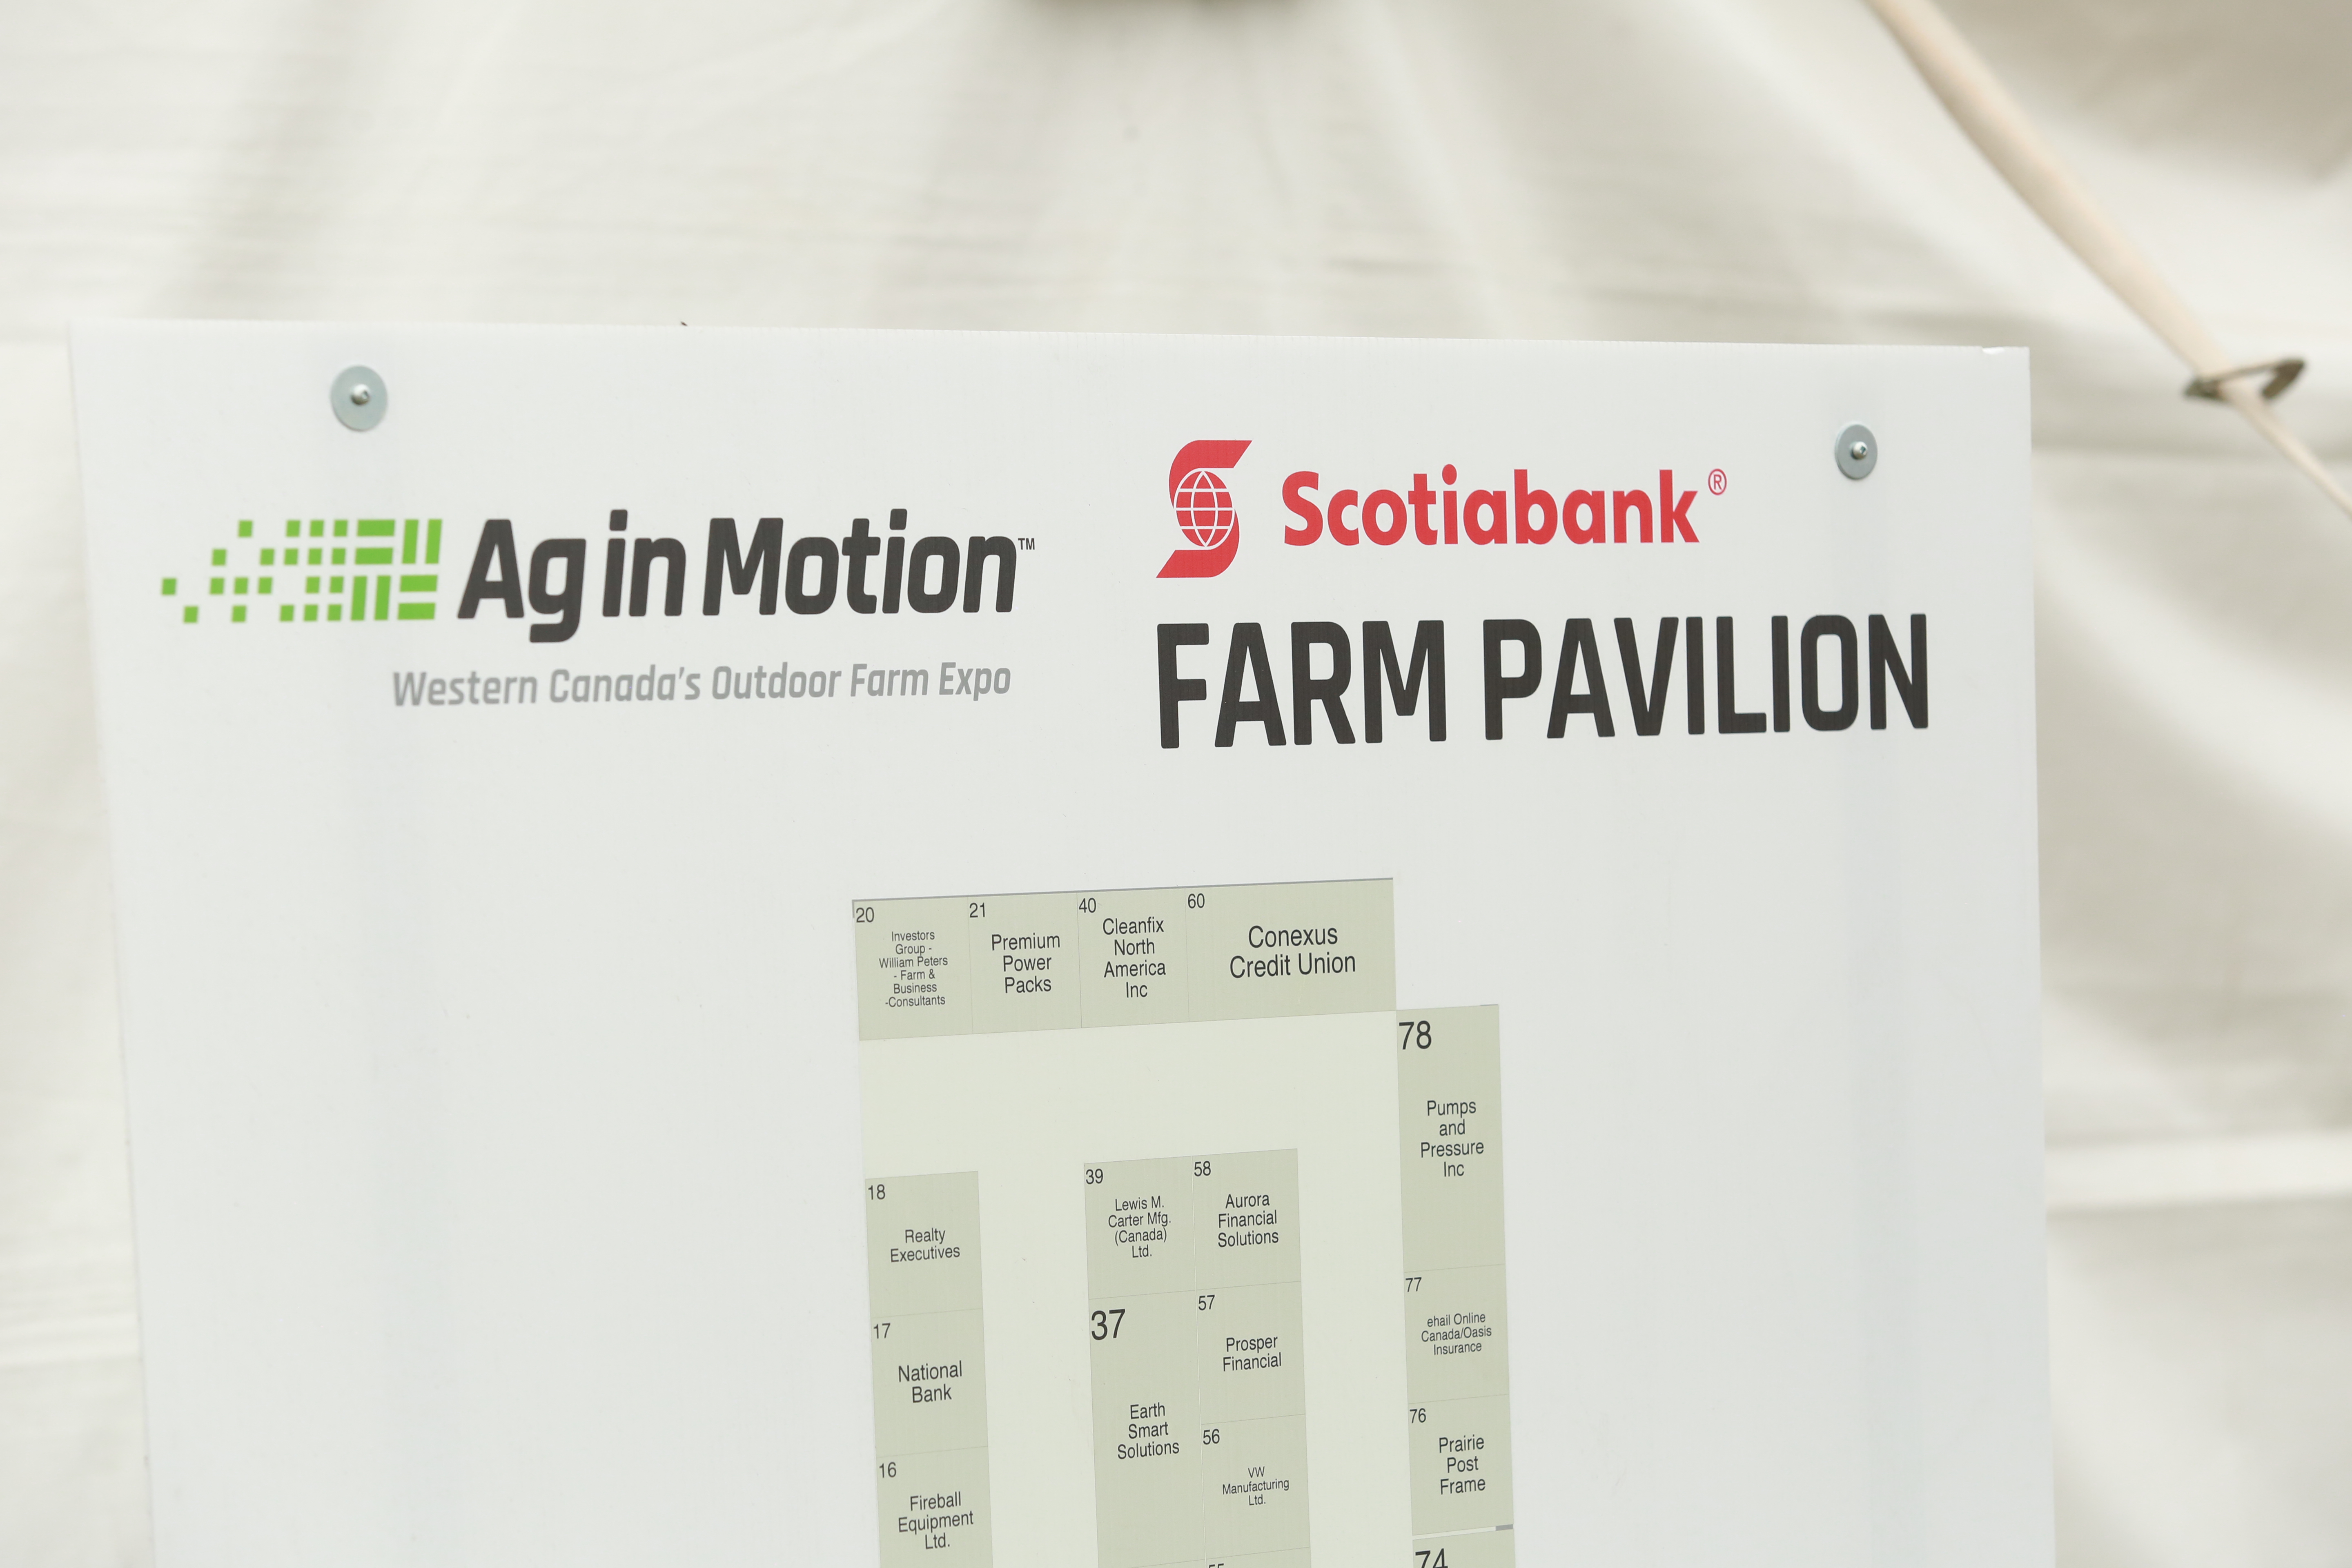 Scotiabank Farm Pavilion Mixes Agriculture and Hockey – Two Canadian Staples